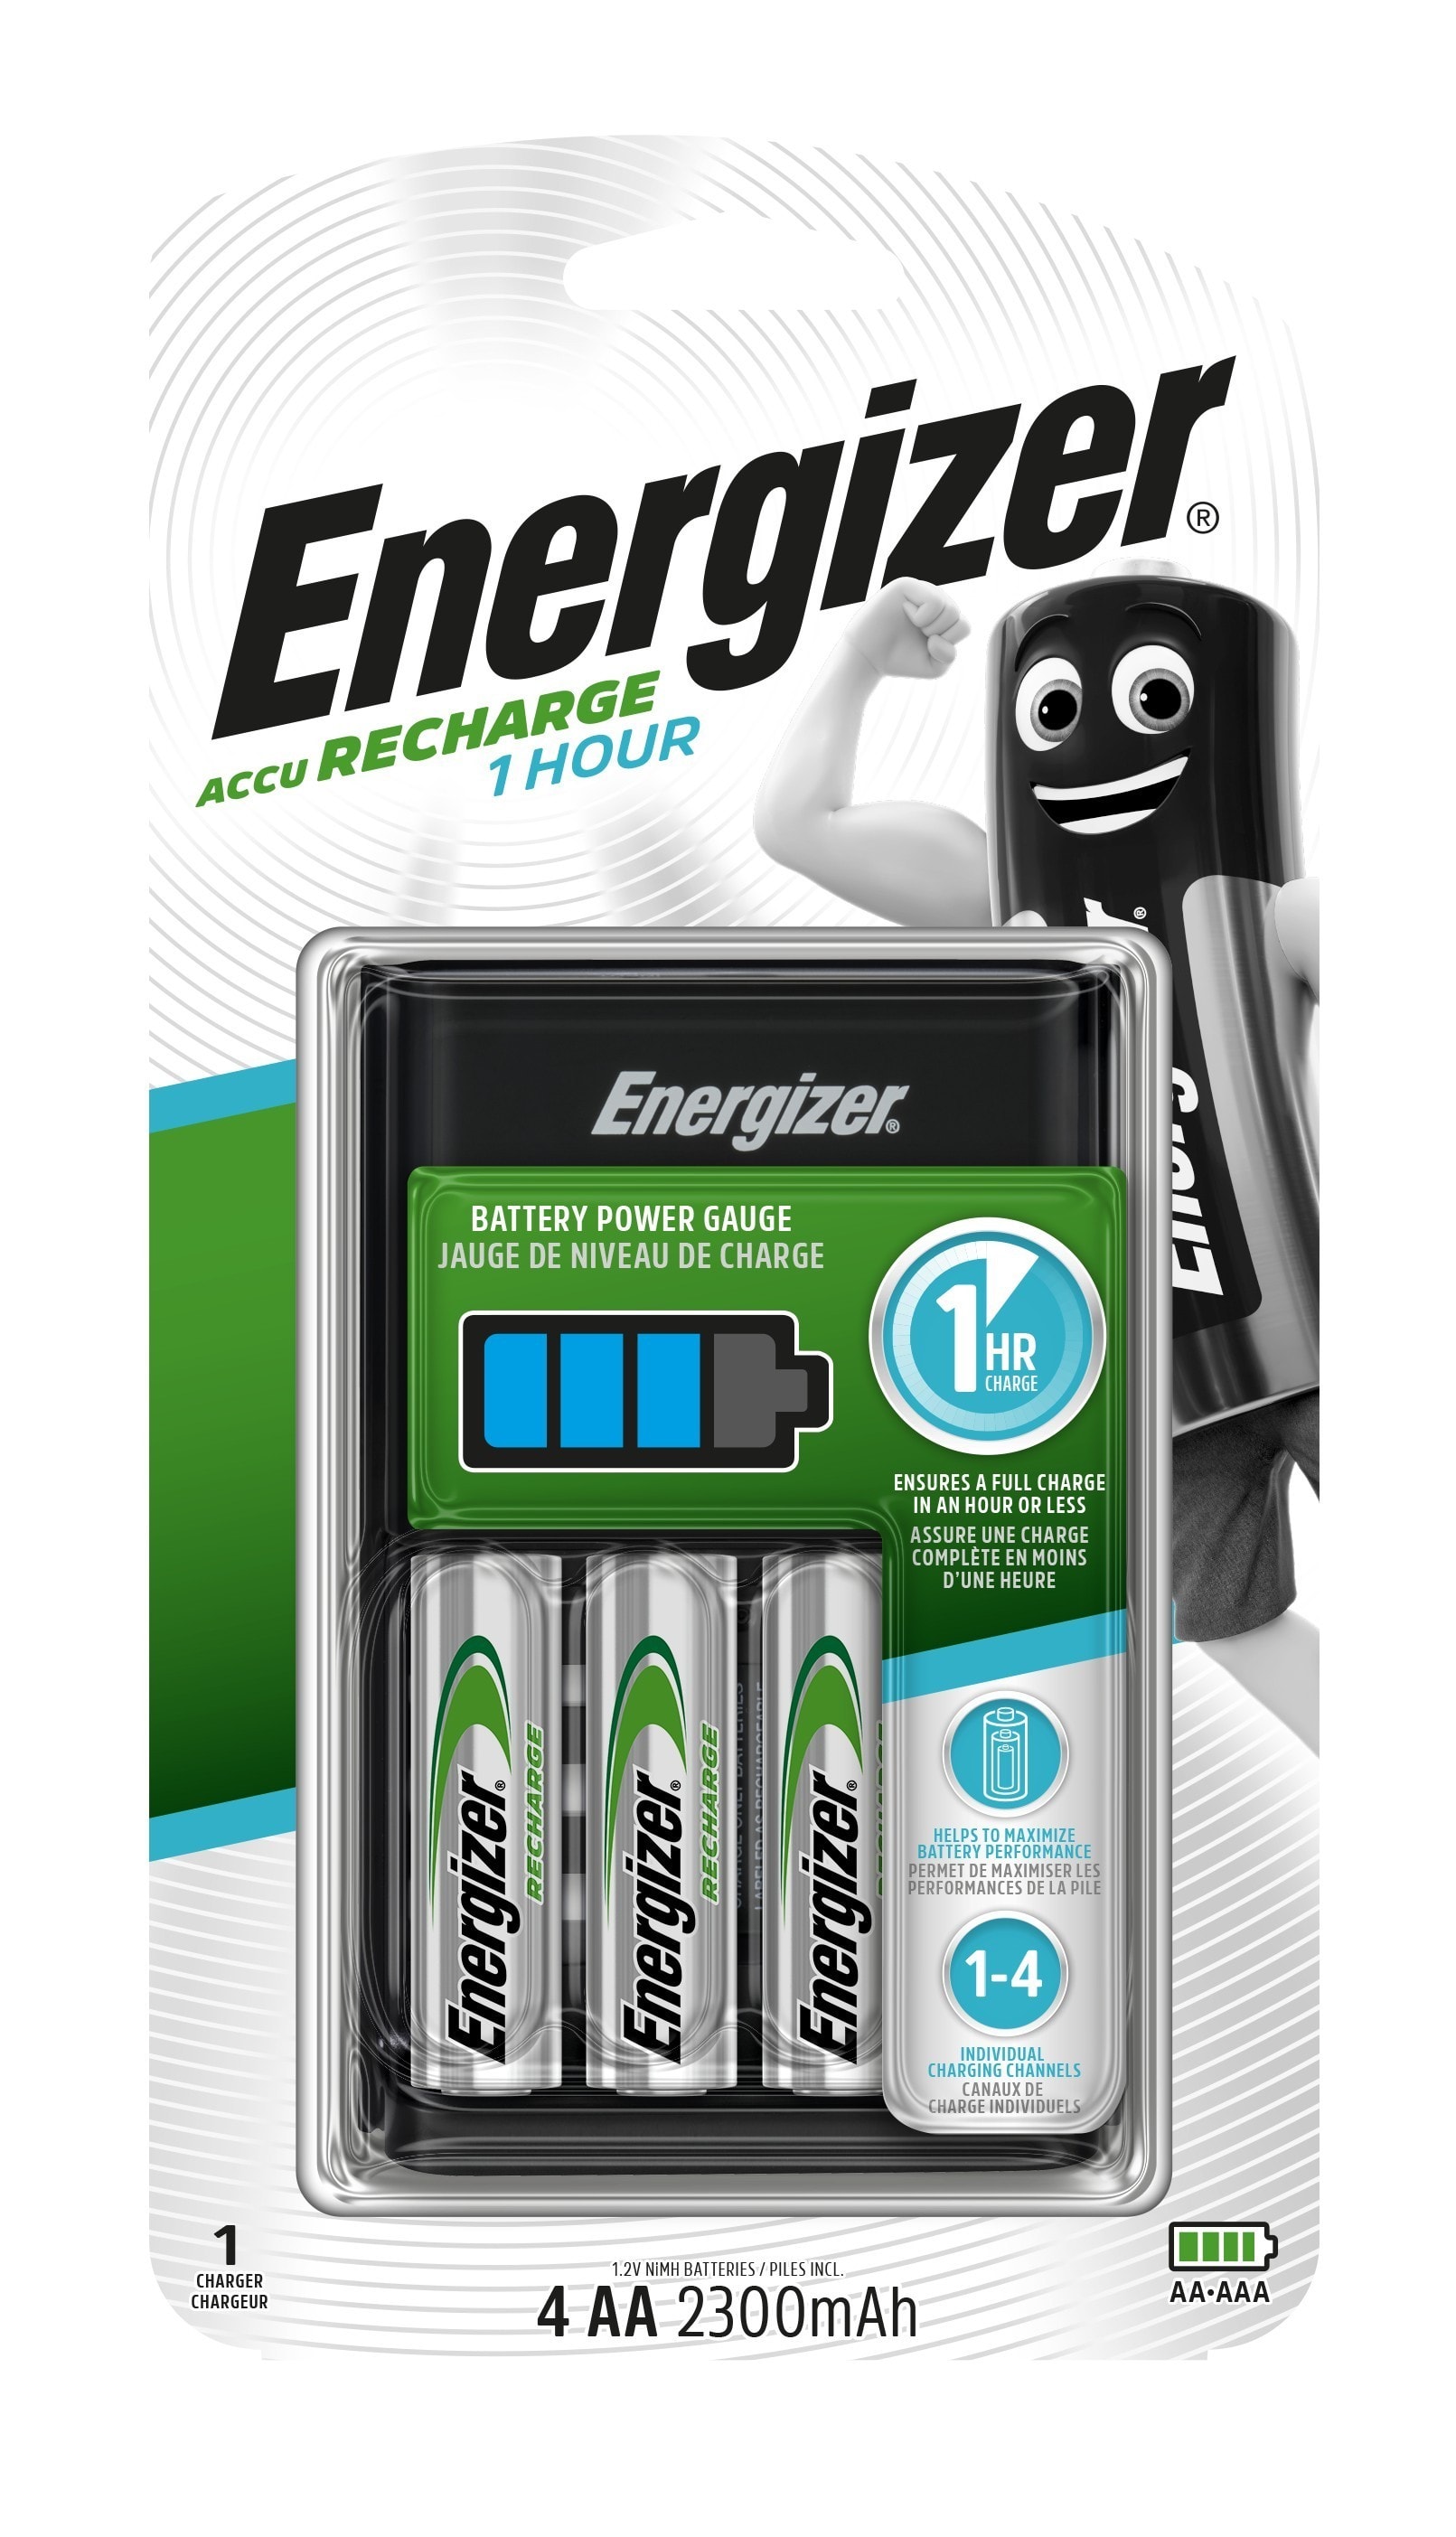 Chargeur 1h recharge 4 piles AA ou AAA en une heure Energizer